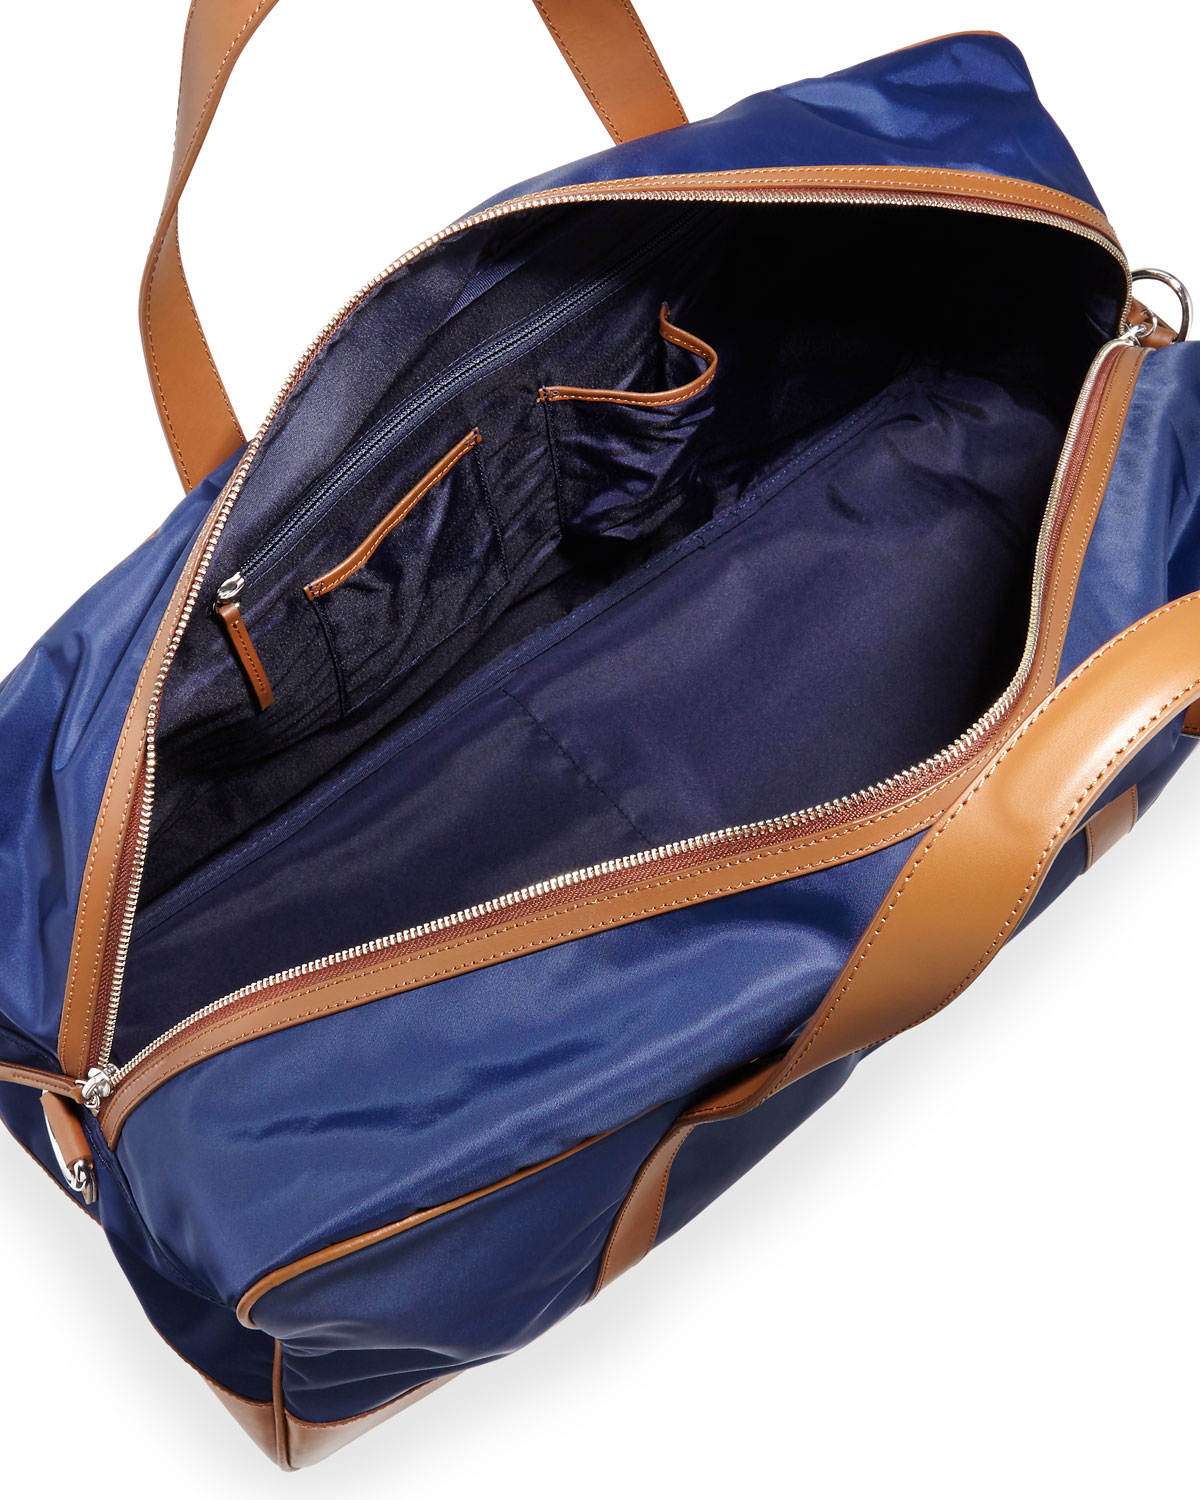 Lyst - Cole Haan Large Nylon Duffle Bag for Men